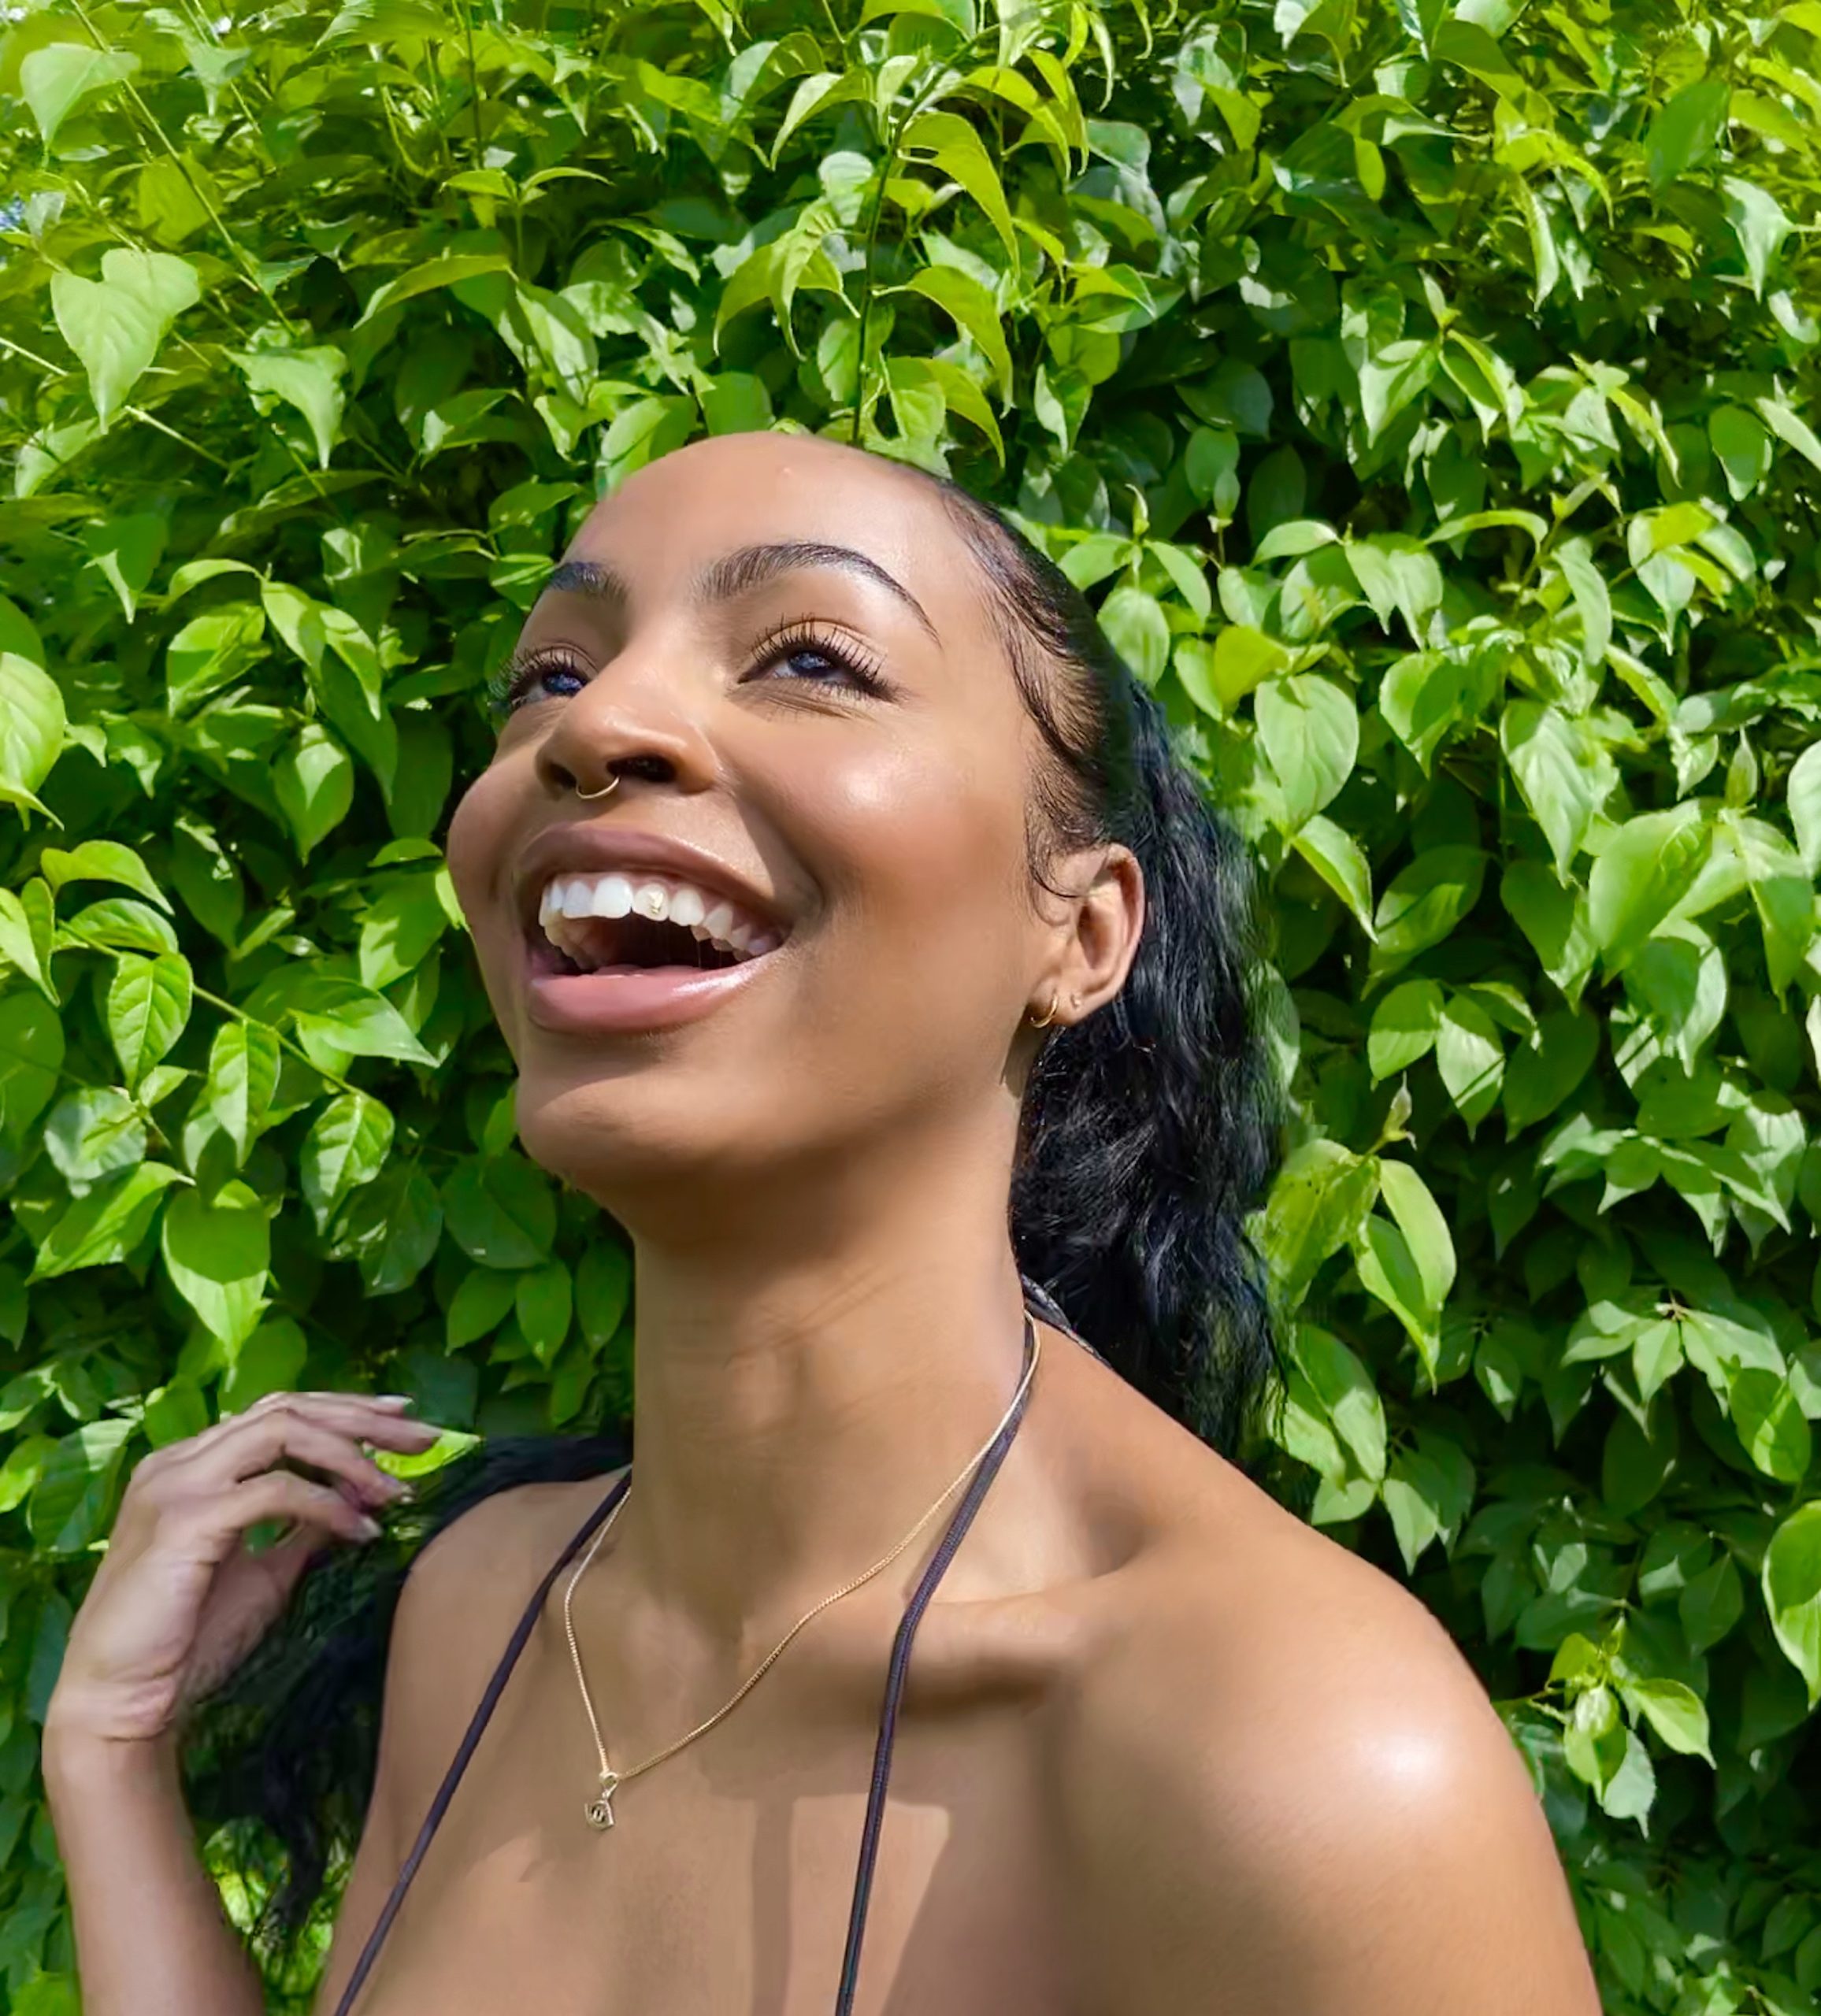 A medium dark-skinned women smiling and looking up with greenery in the background.